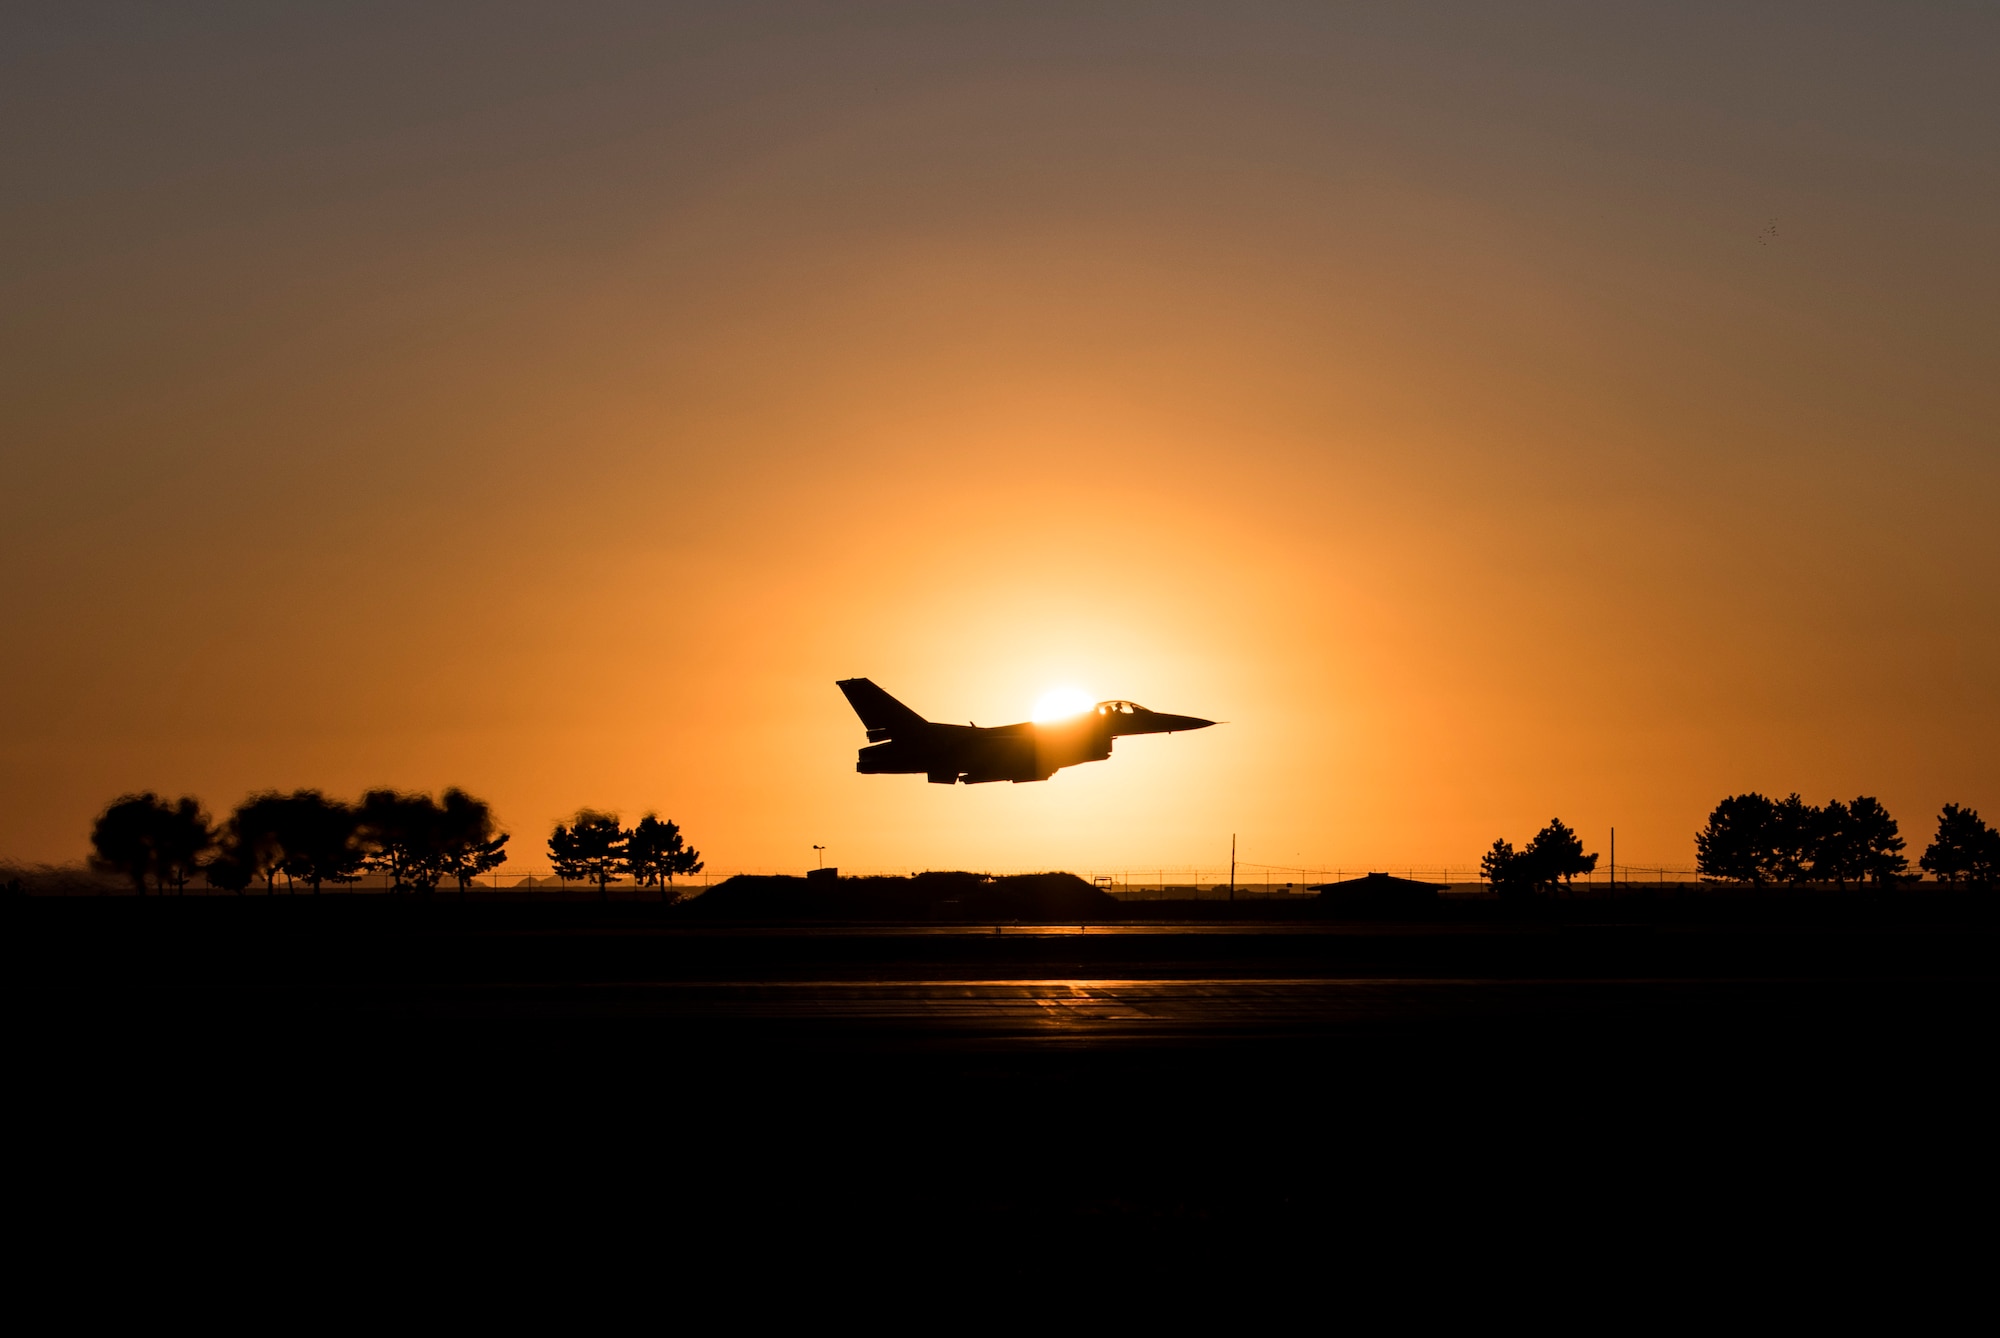 A U.S. Air Force F-16 Fighting Falcon aircraft on from the 8th Fighter Wing takes off for a routine training flight at Kunsan Air Base, Republic of Korea, Oct. 8, 2019. The 8th FW is comprised of two F-16 squadrons, and its primary mission is conducting air-to-ground and air-to-air missions against adversaries when called upon. (U.S. Air Force photo by Senior Airman Stefan Alvarez)